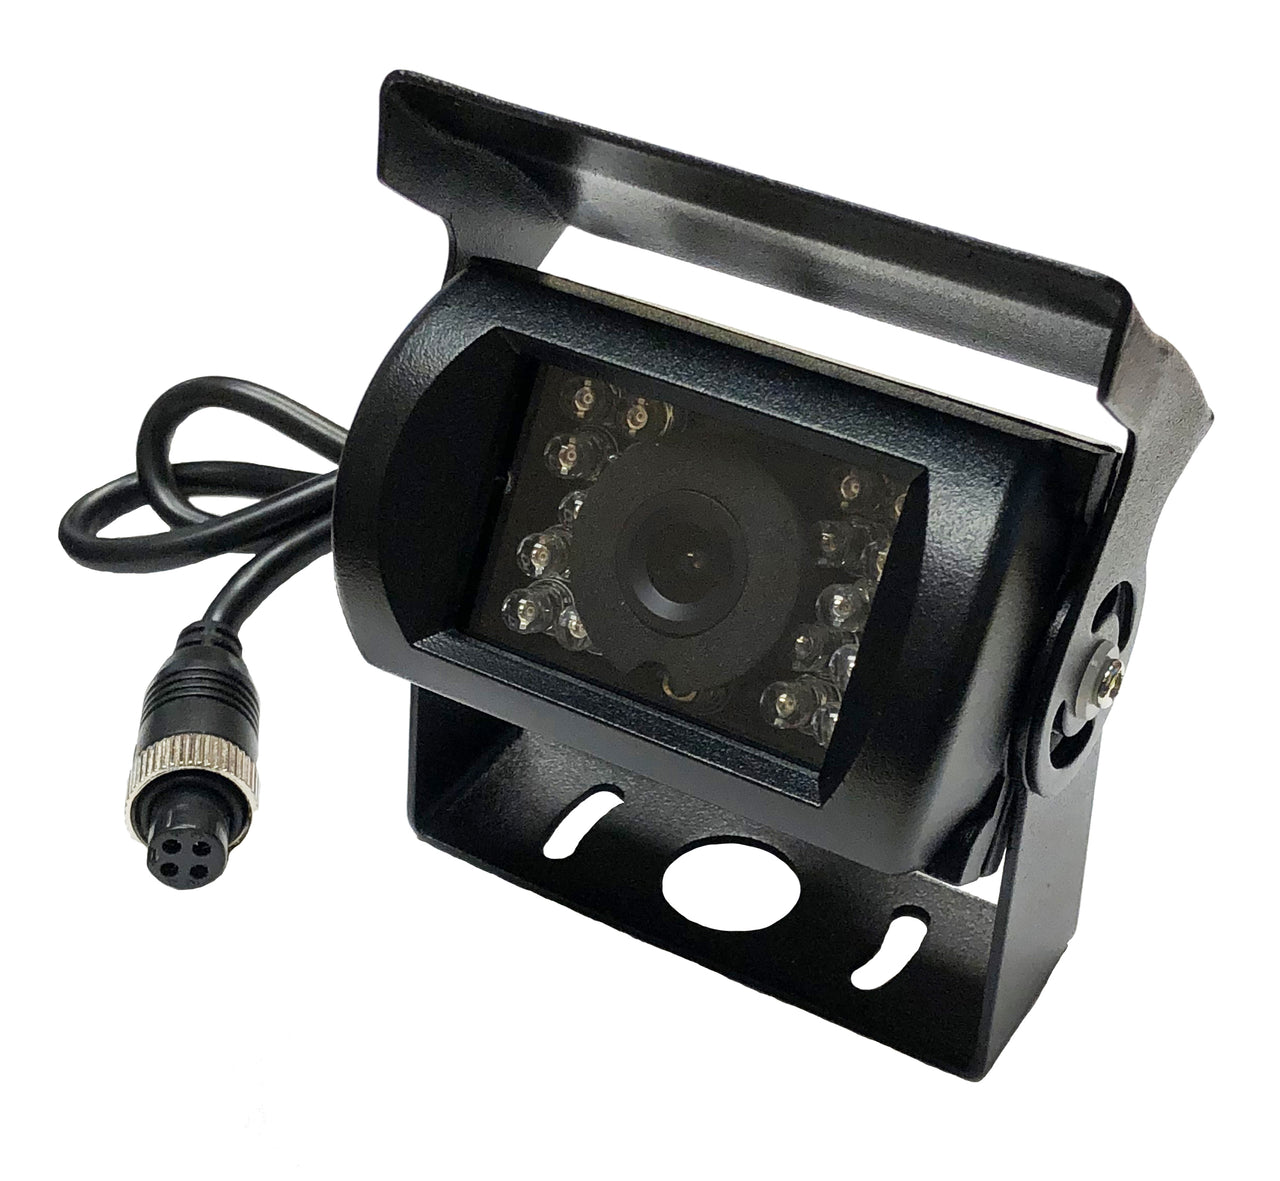 Crux CTM-11YB Commercial Grade Top Mount Camera with 1/3” Sony CCD Sensor and IR LEDs